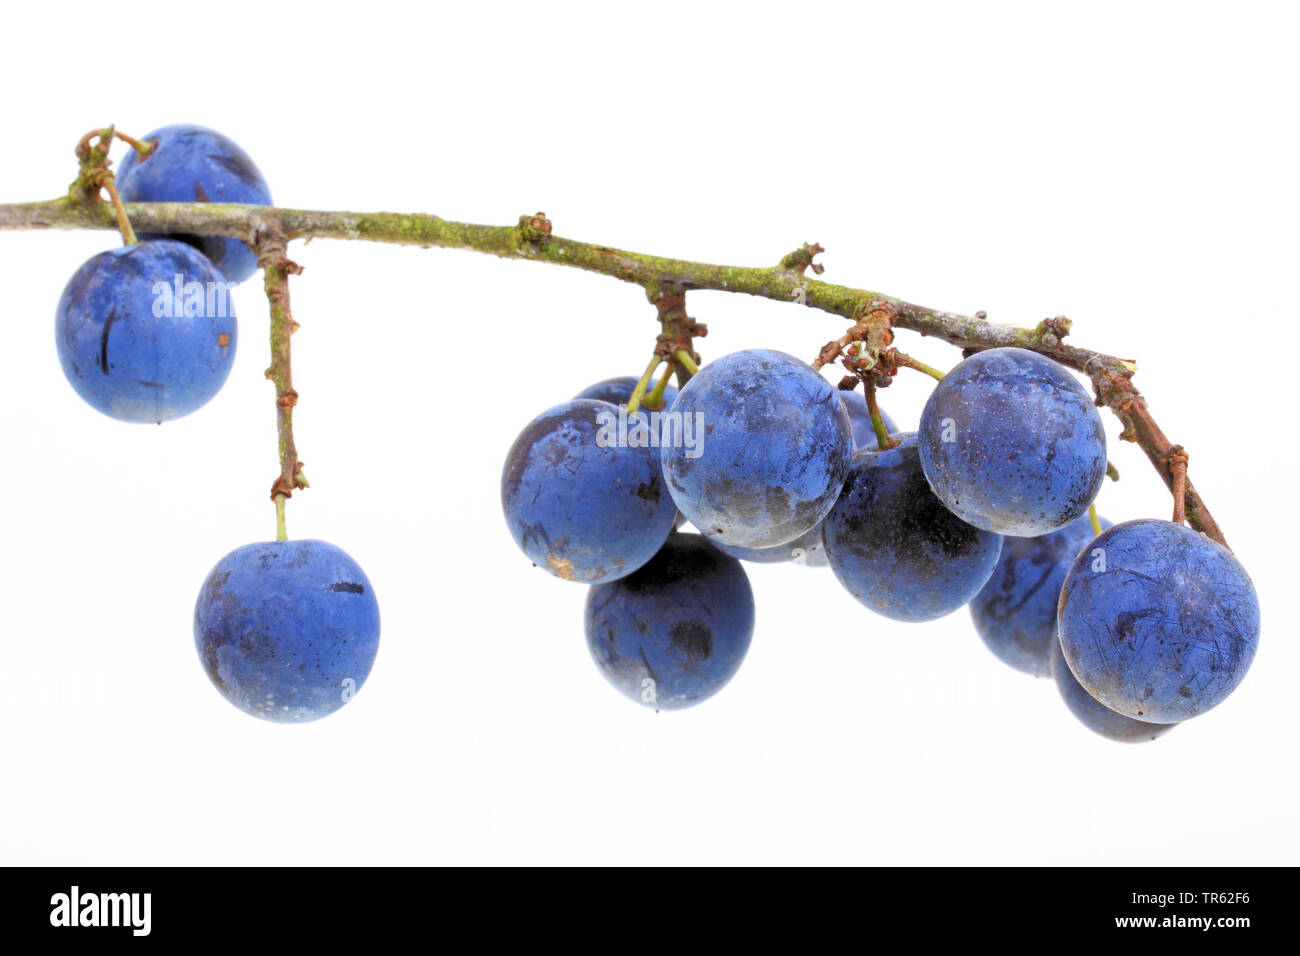 blackthorn, sloe (Prunus spinosa), fruits on a branch, cutout Stock Photo